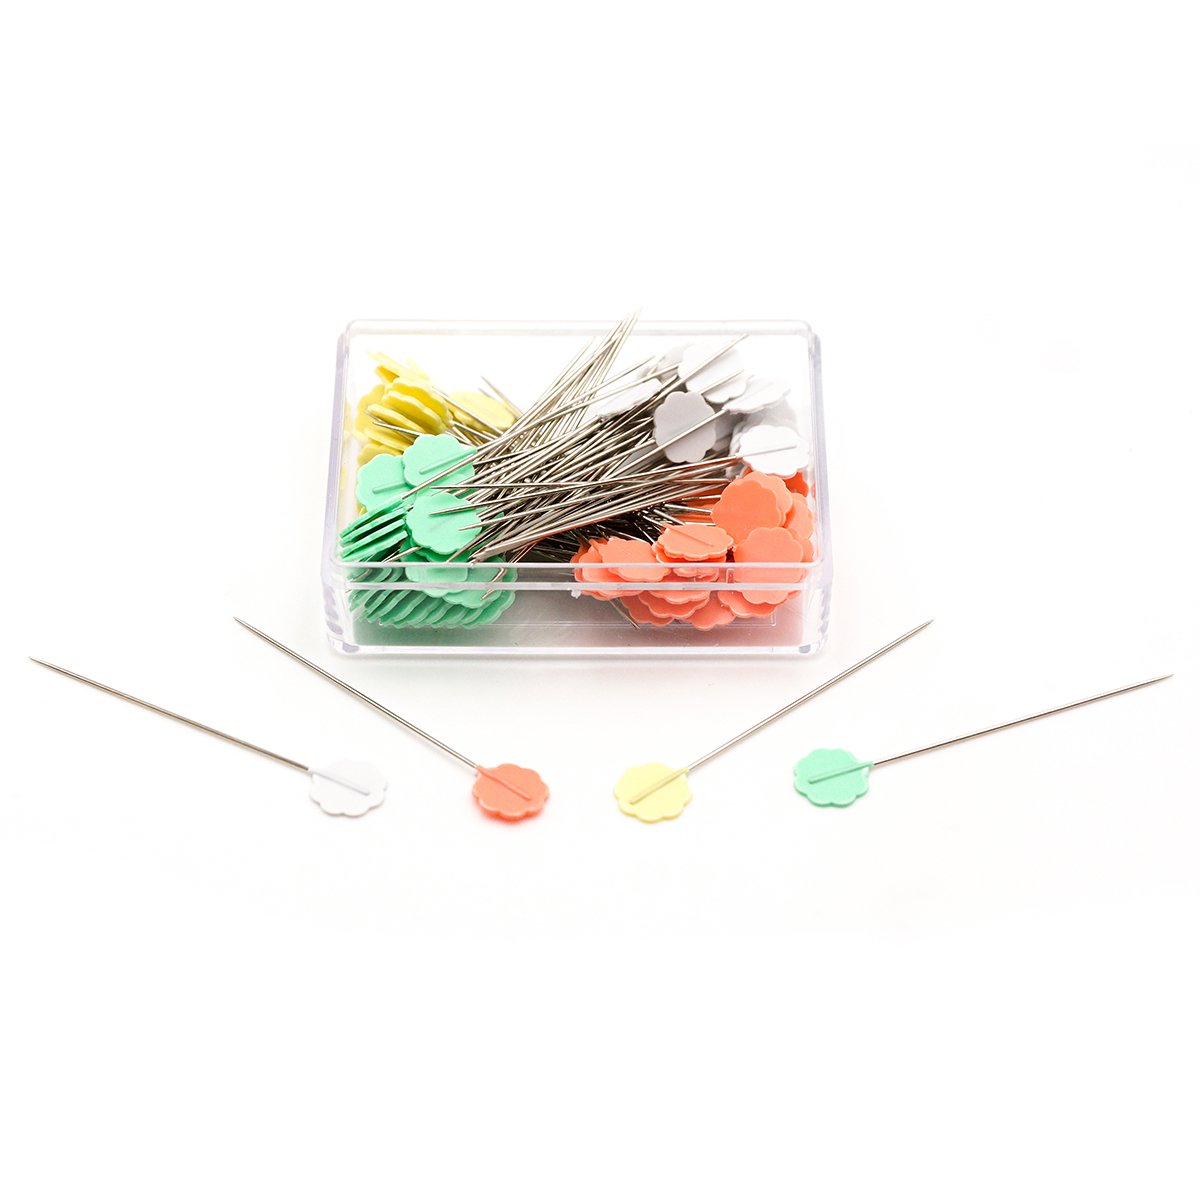 Flower Head Pins, Multi-Colored PASTELS 100 Count – The Singer